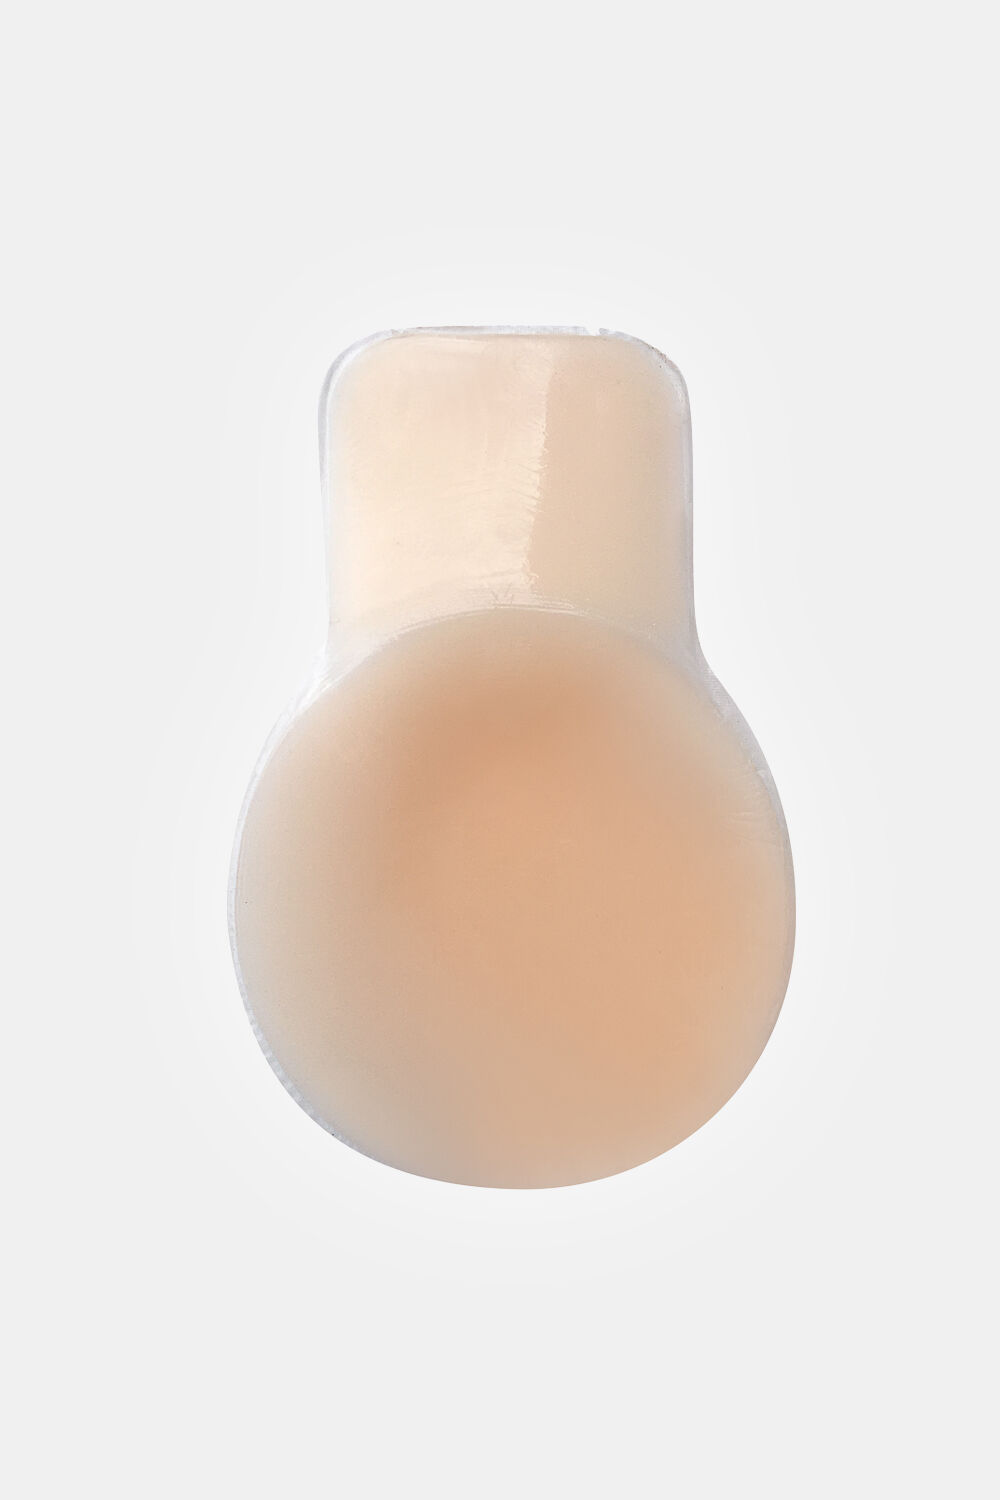 LIFT UPS IN NUDE in colour RUGBY TAN